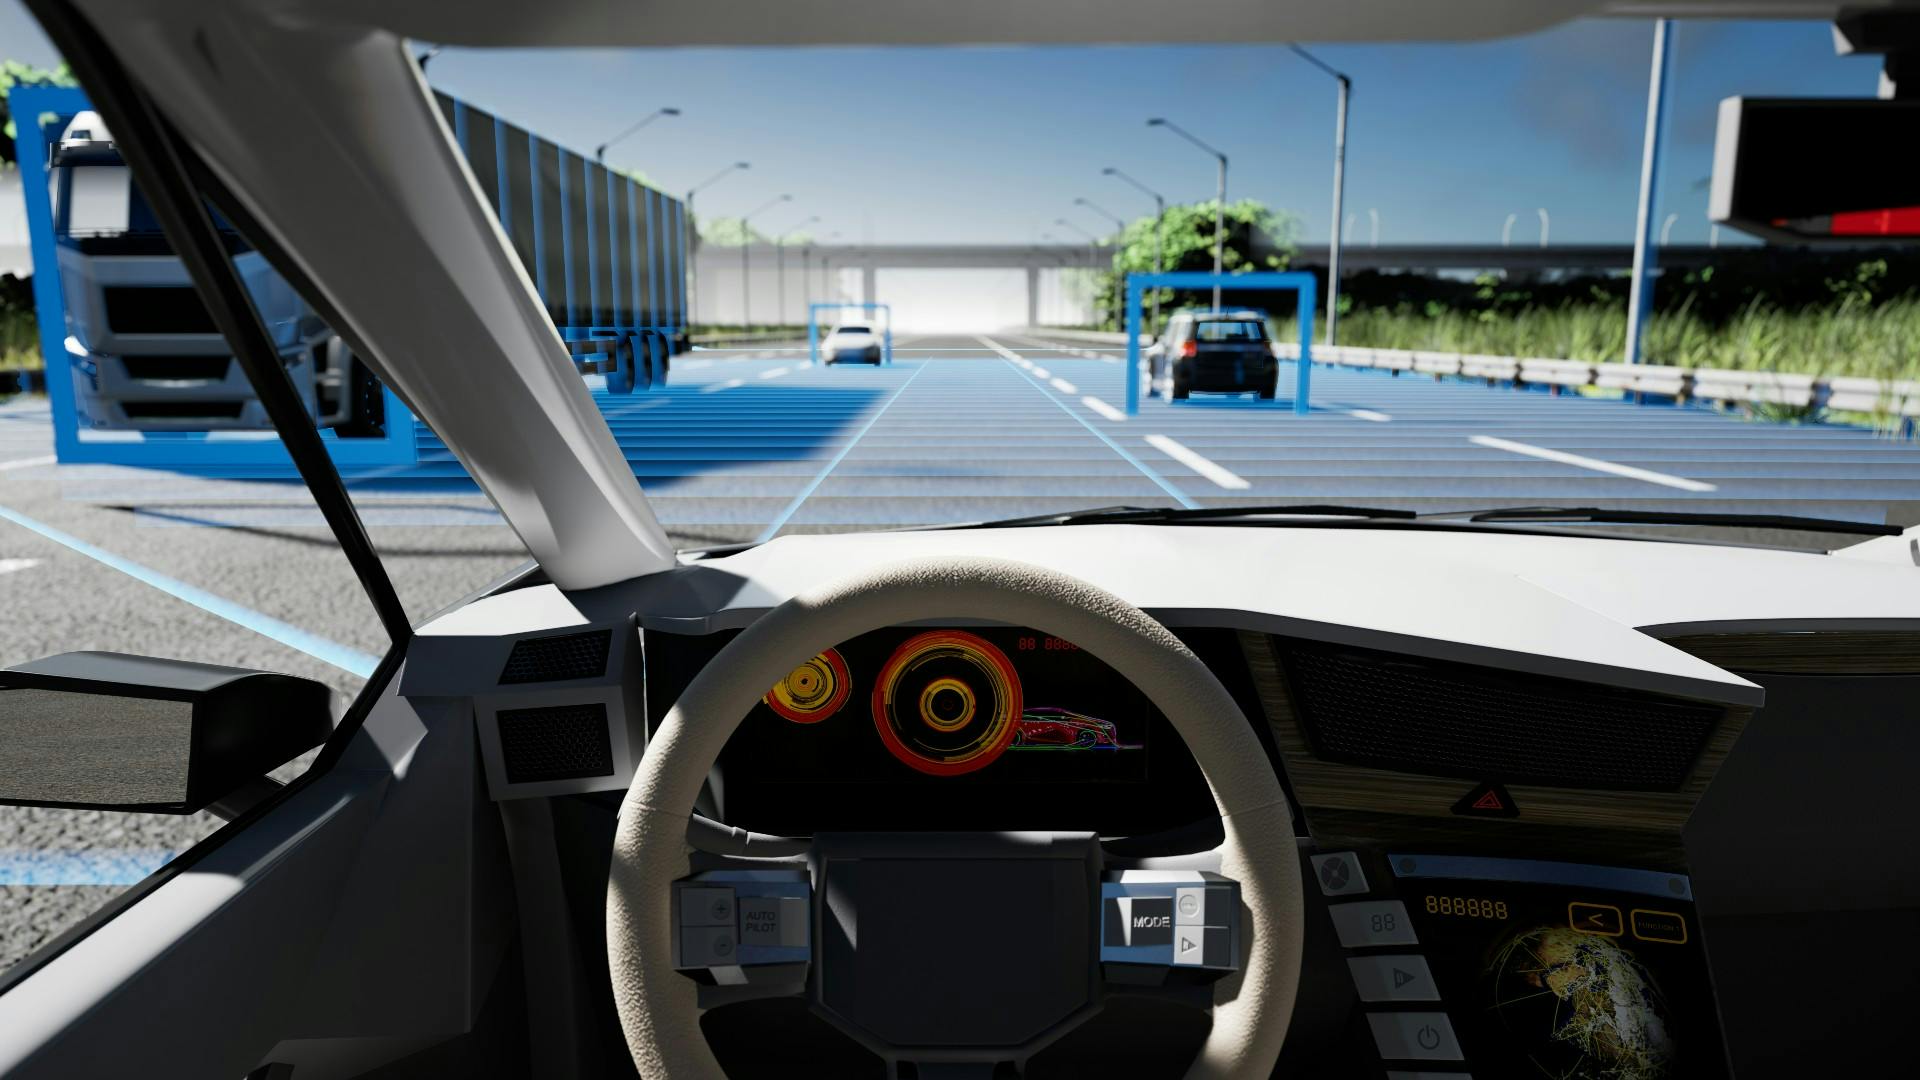 Interior view of an autonomous vehicle (AV) using perception sensing systems to evaluate the distance of other vehicles on the road.